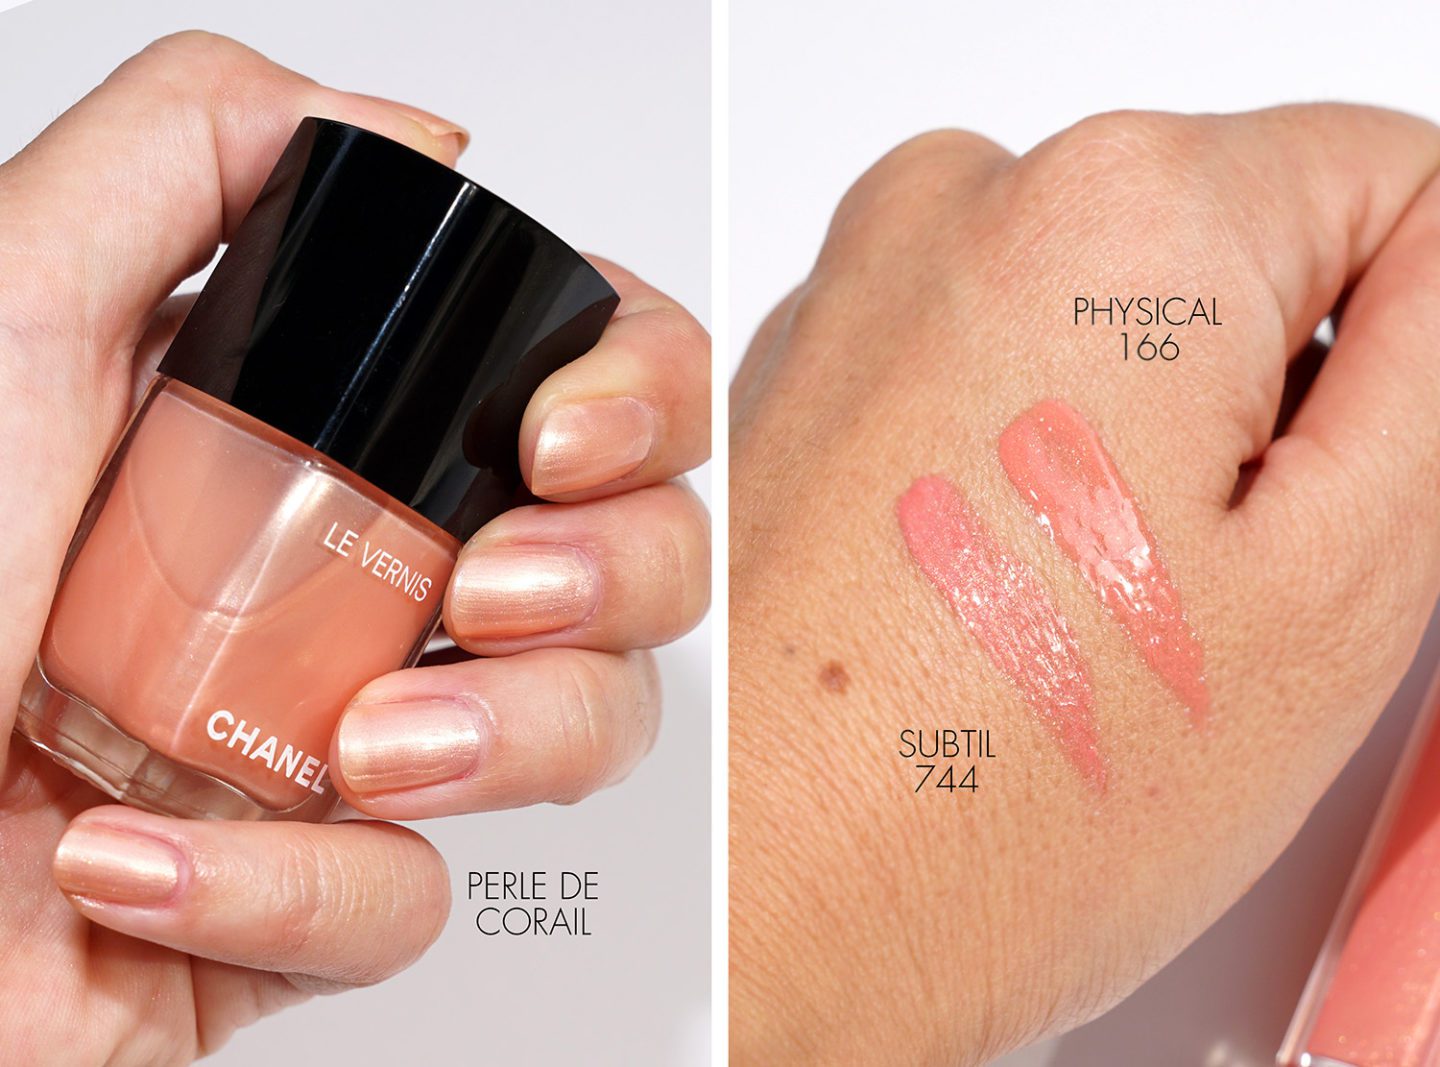 Chanel Le Vernis Perle de Corail + Rouge Coco Gloss Subtil and Physical